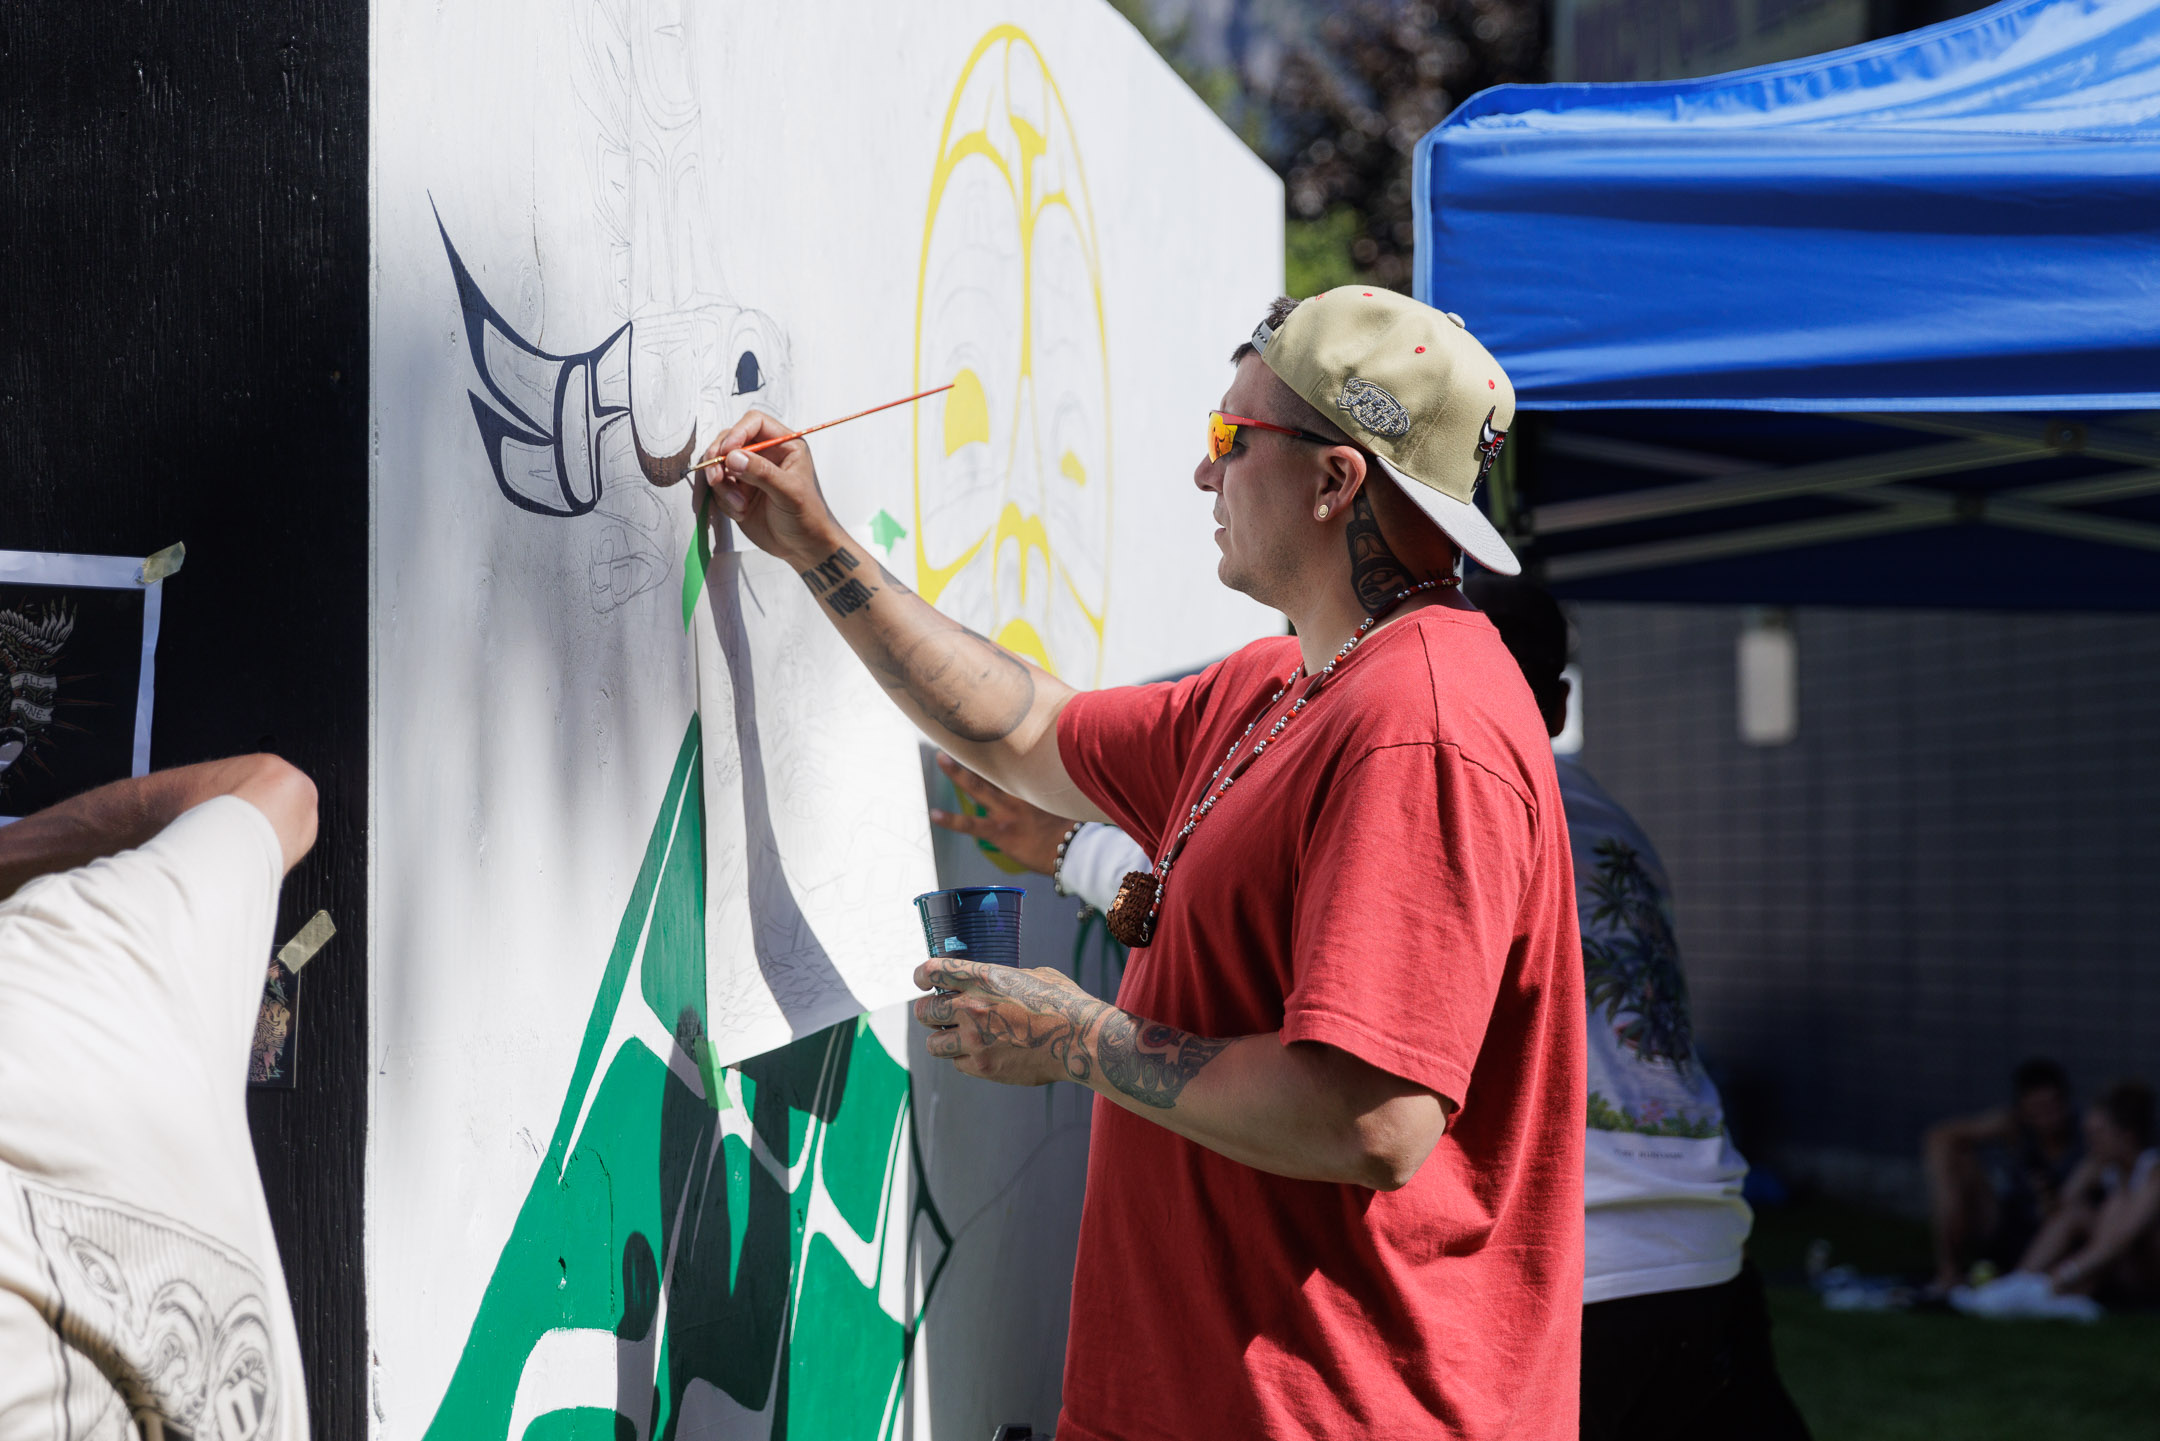 https://www.downtownsquamish.com/wp-content/uploads/2022/09/220625_Squamish-Mural-Festival-Day-3_CTP_0668.jpg